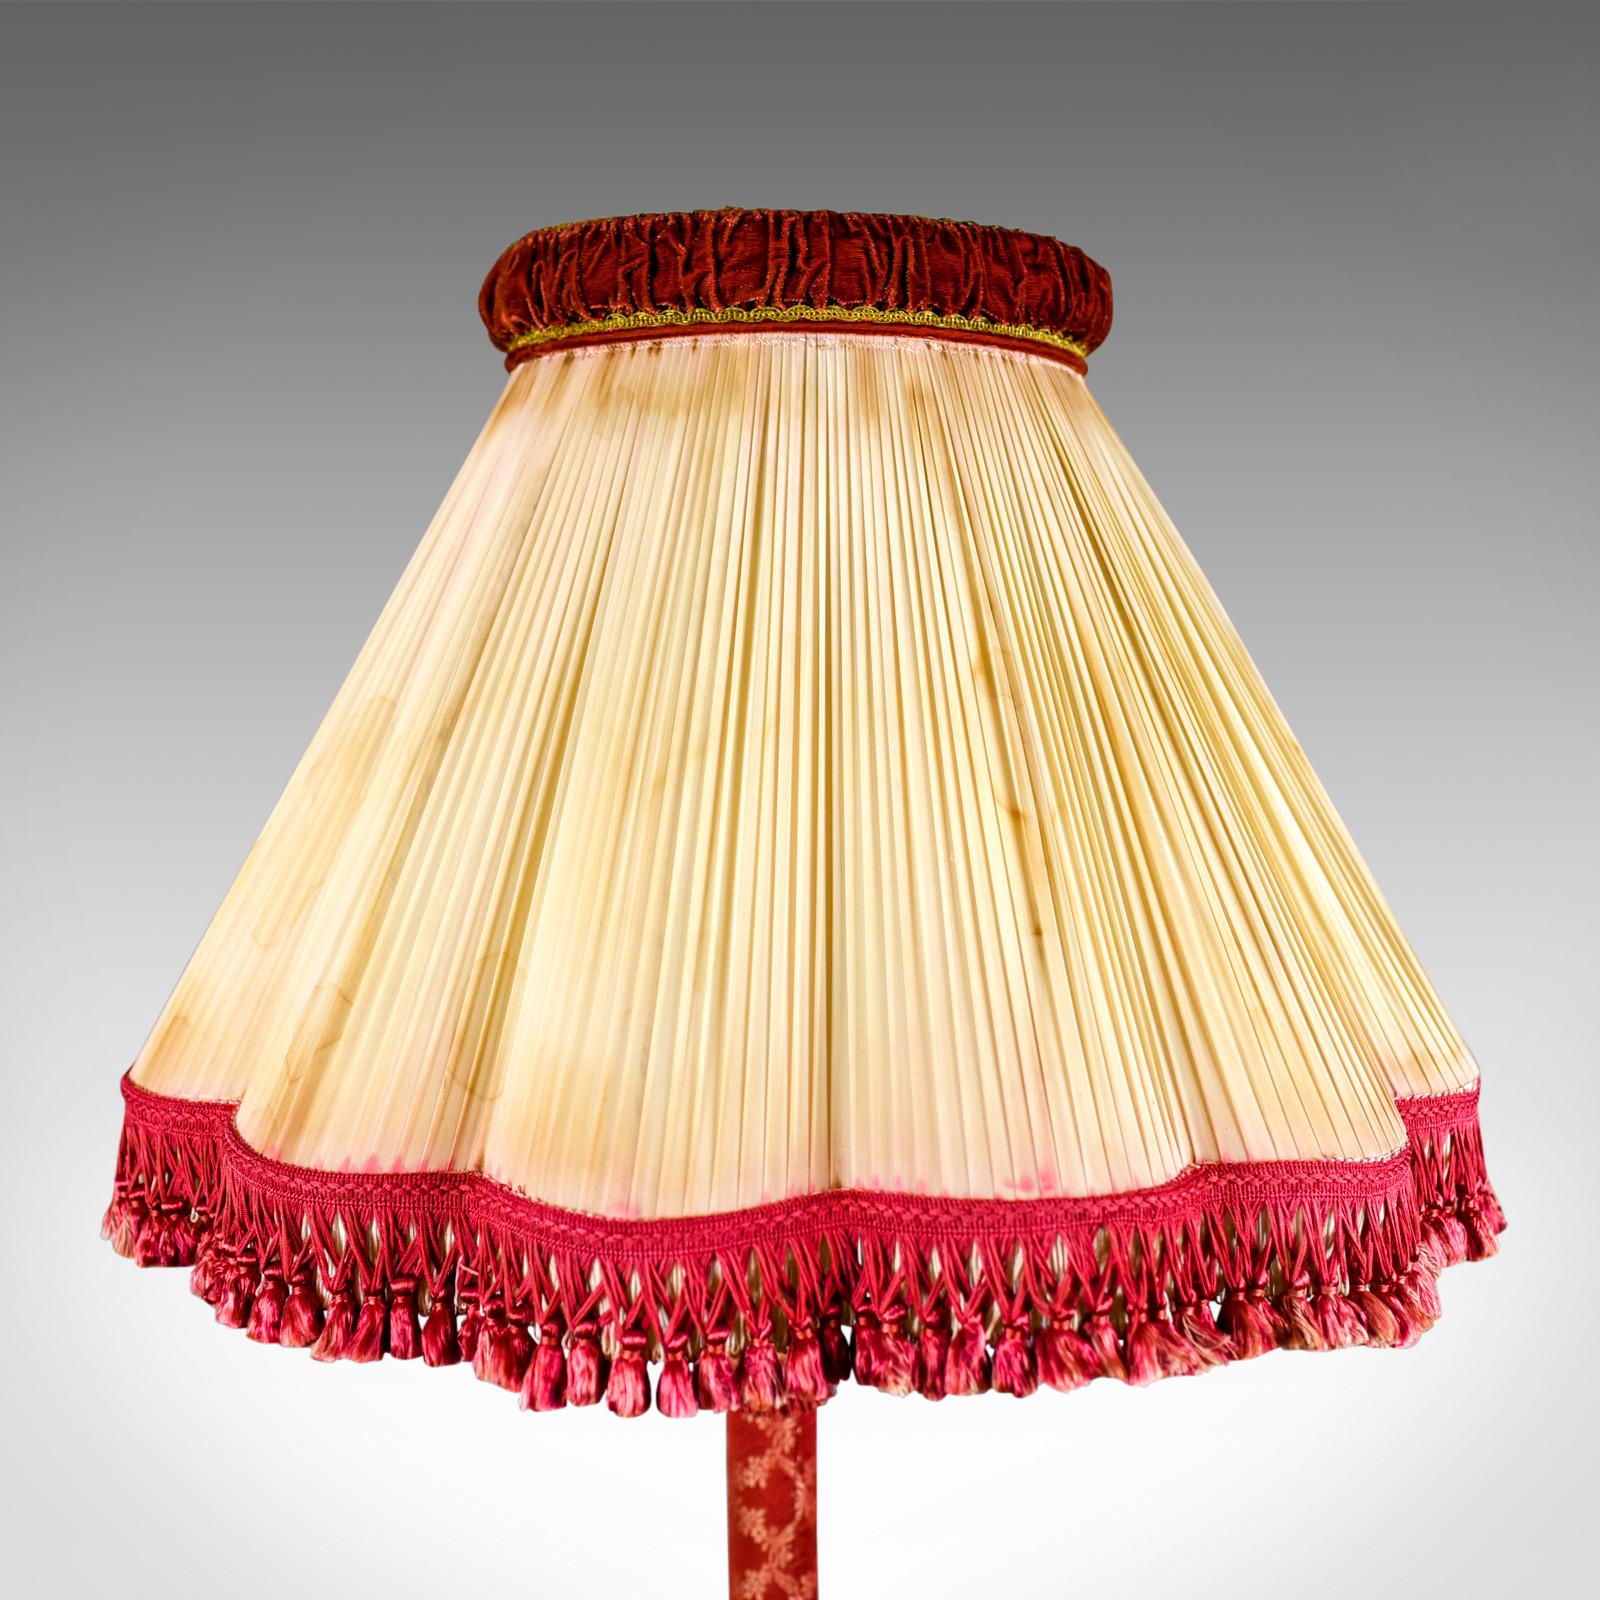 This is a standard lamp, a vintage Italian, fabric and gilt covered, floor standing light dating to the late Art Deco period, circa 1940. 

Classical overtones to the elegant stem 
Finished in a ruby silk cotton cloth with matching fringing
Bell